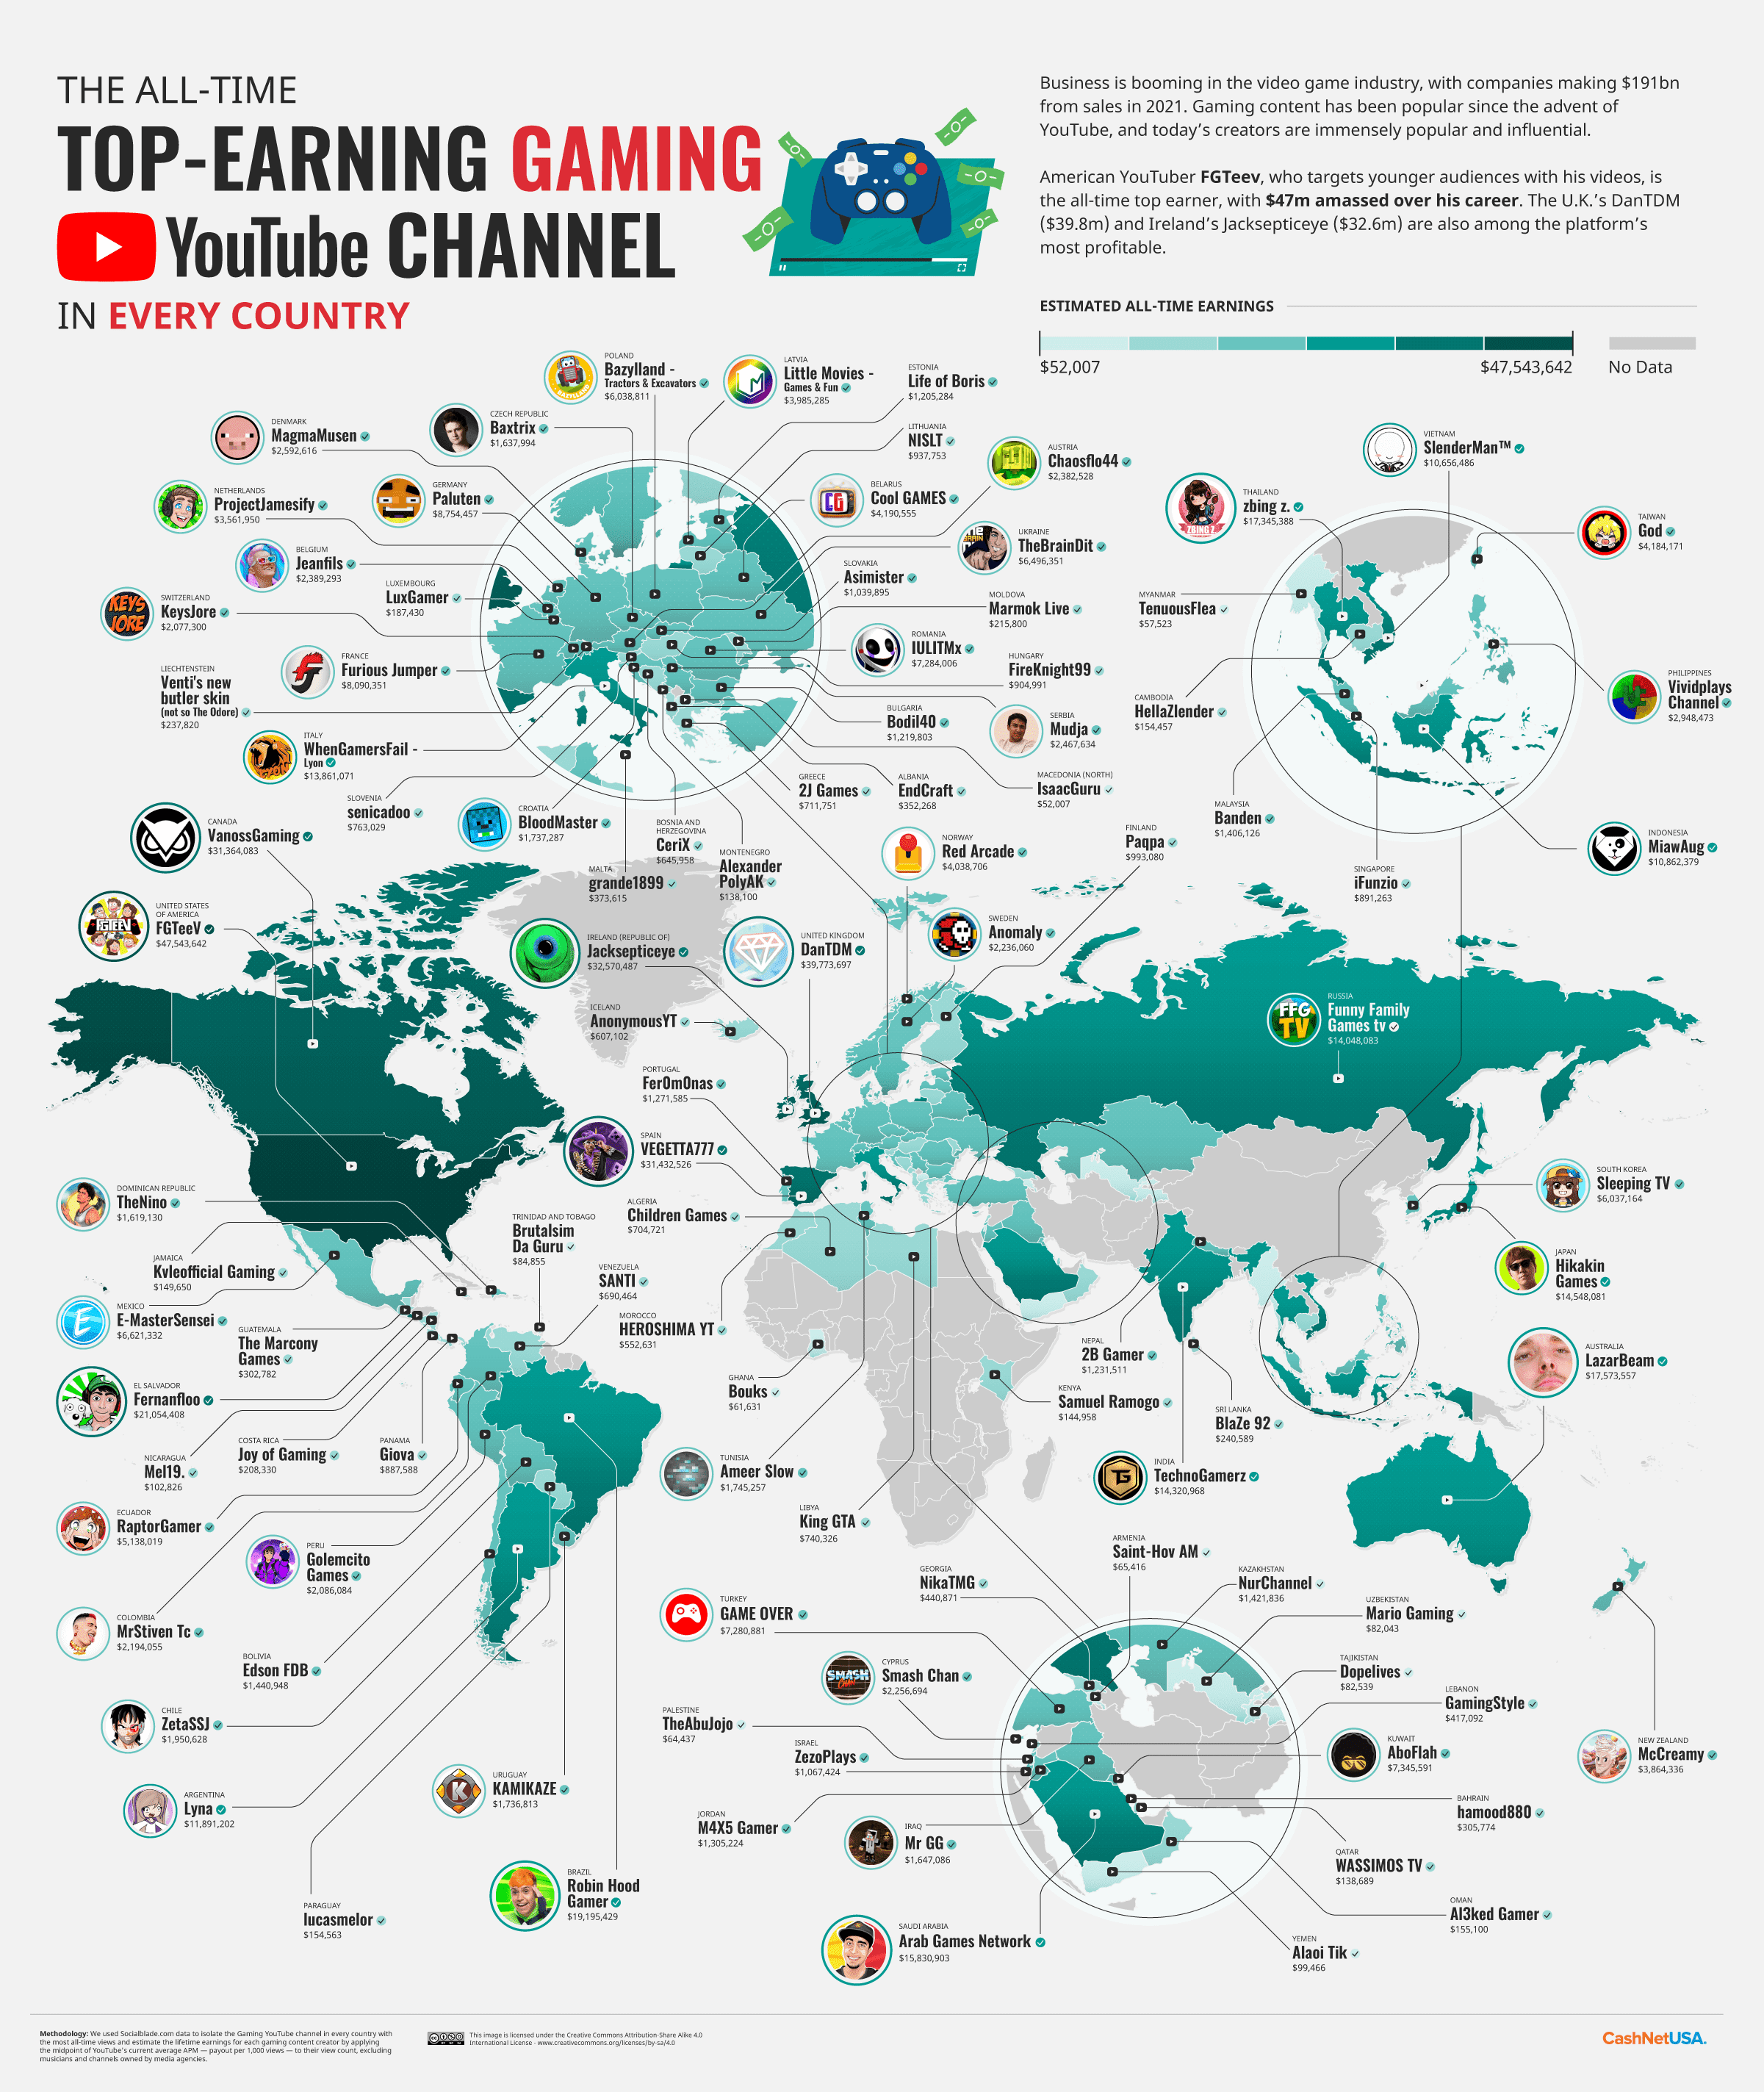 The richest  content creator from every country in the world